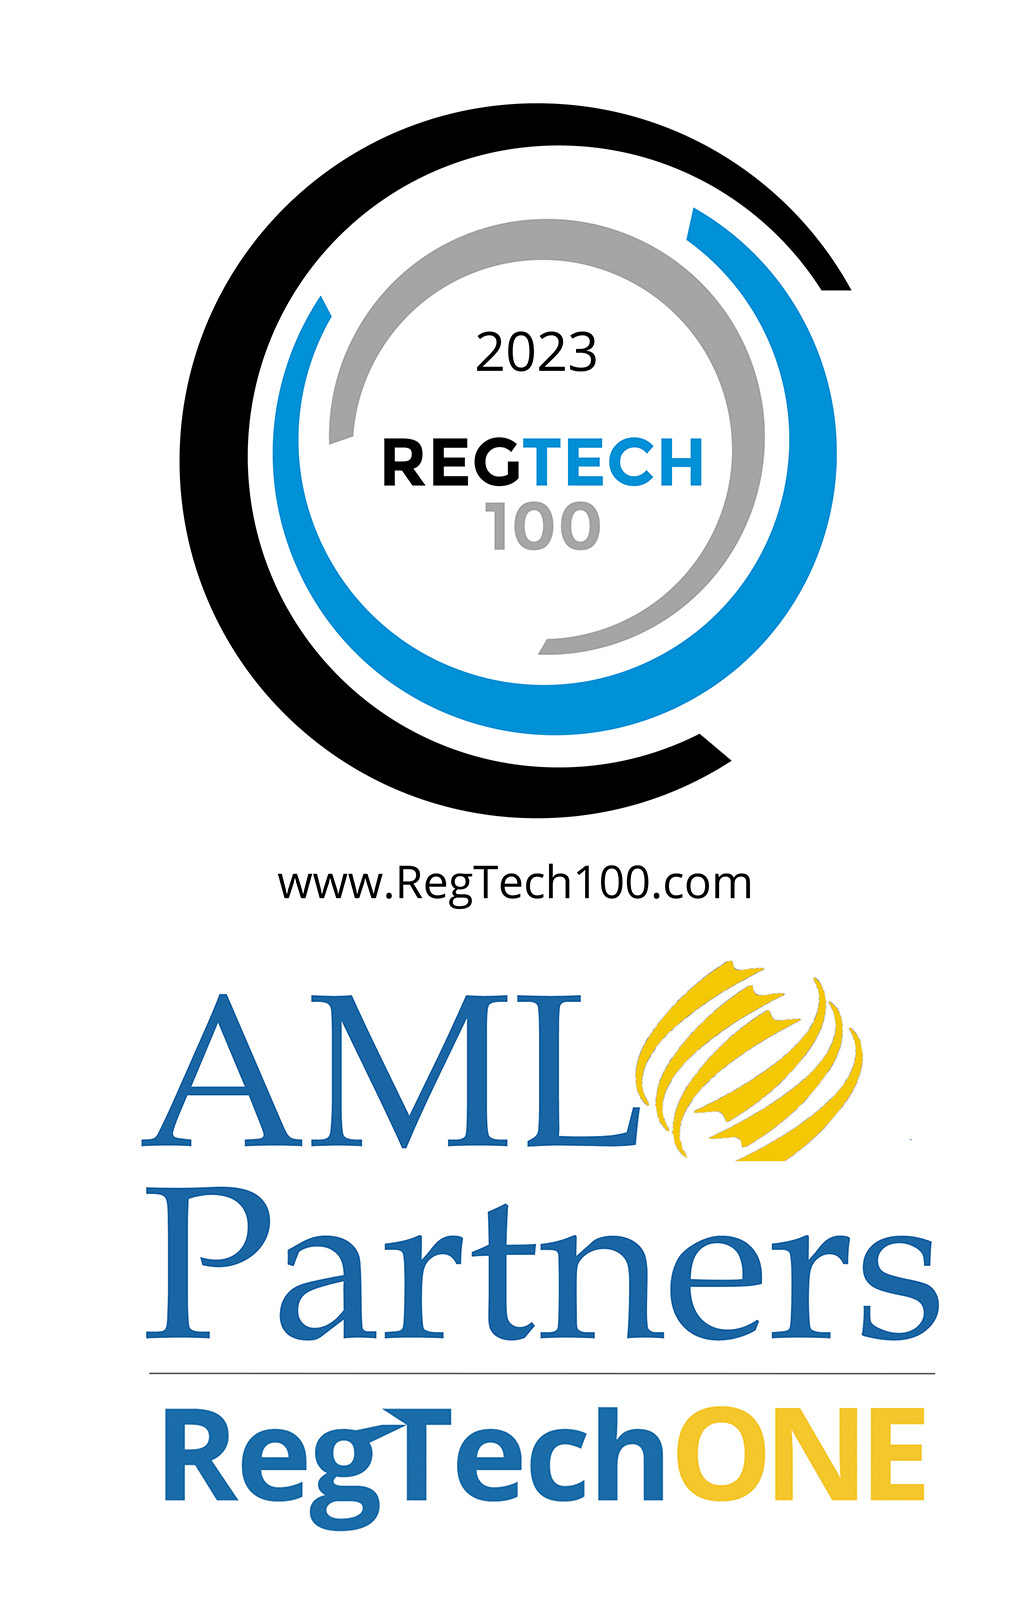 RegTech100 2023 for AML Partners and RegTechONE platform. Software for AML solutions, KYC software, KYC solutions, AI in AML